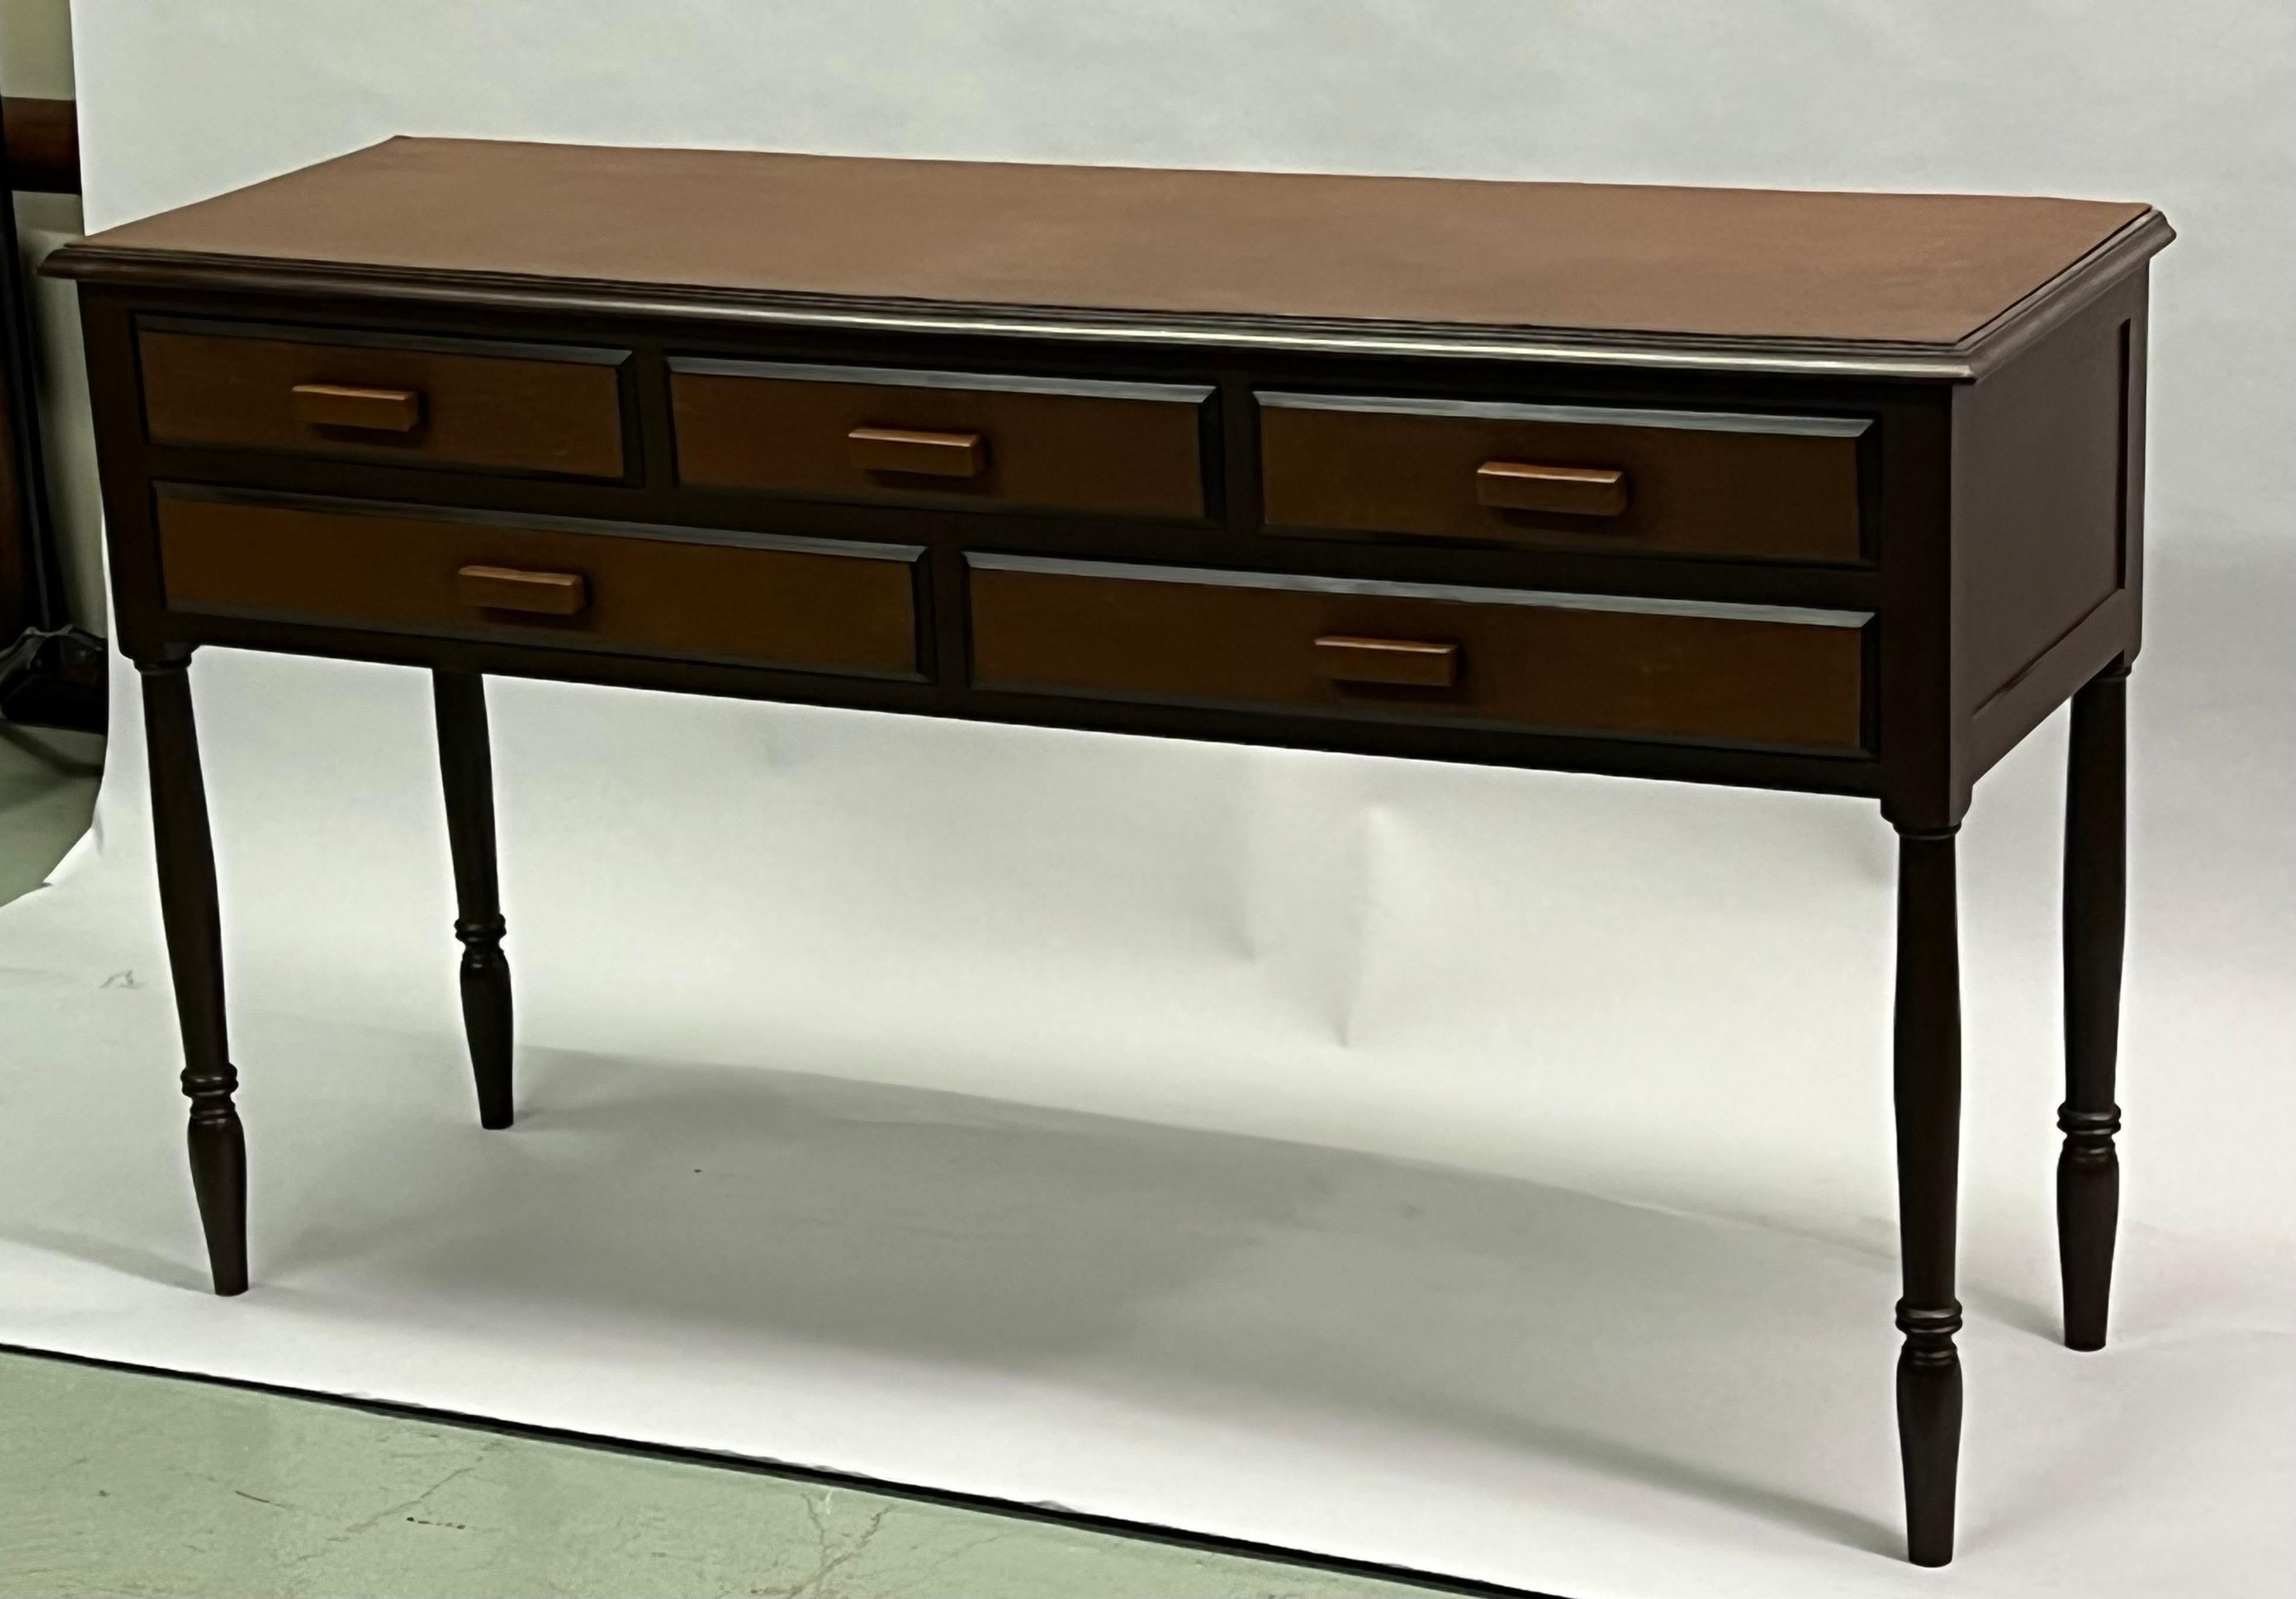 20th Century French Mid-Century Modern Neoclassical Leather Console after Jean-Michel Frank For Sale